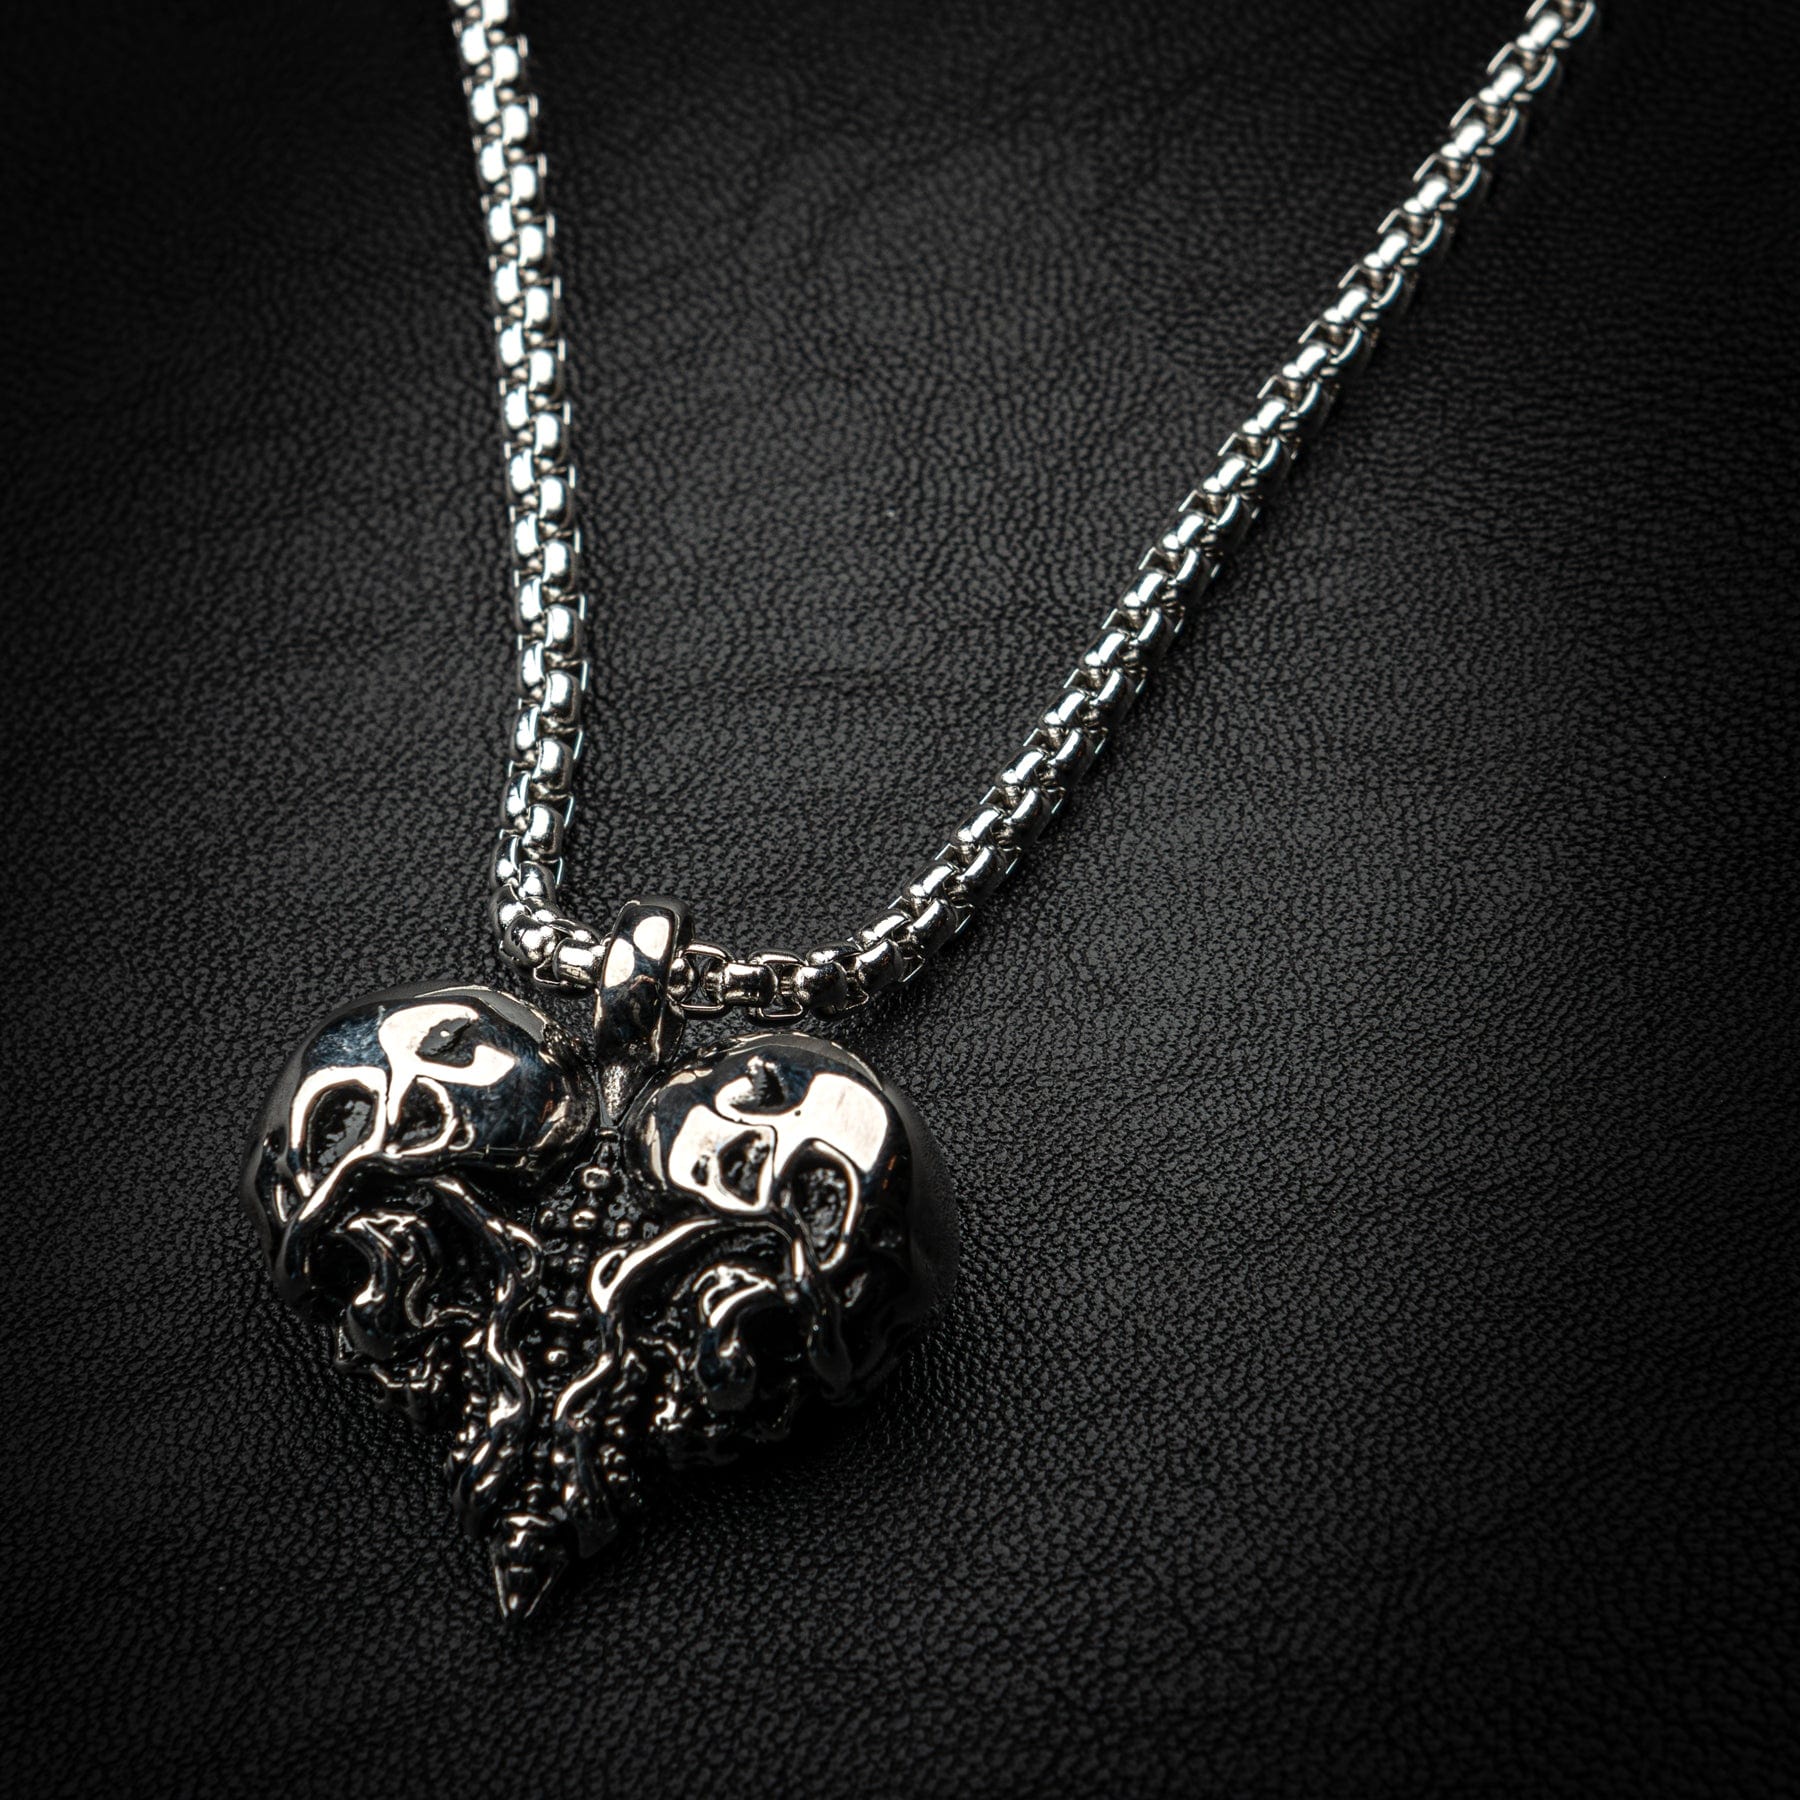 Wornstar Clothing Necklace Till Death Do Us Part Chain Necklace